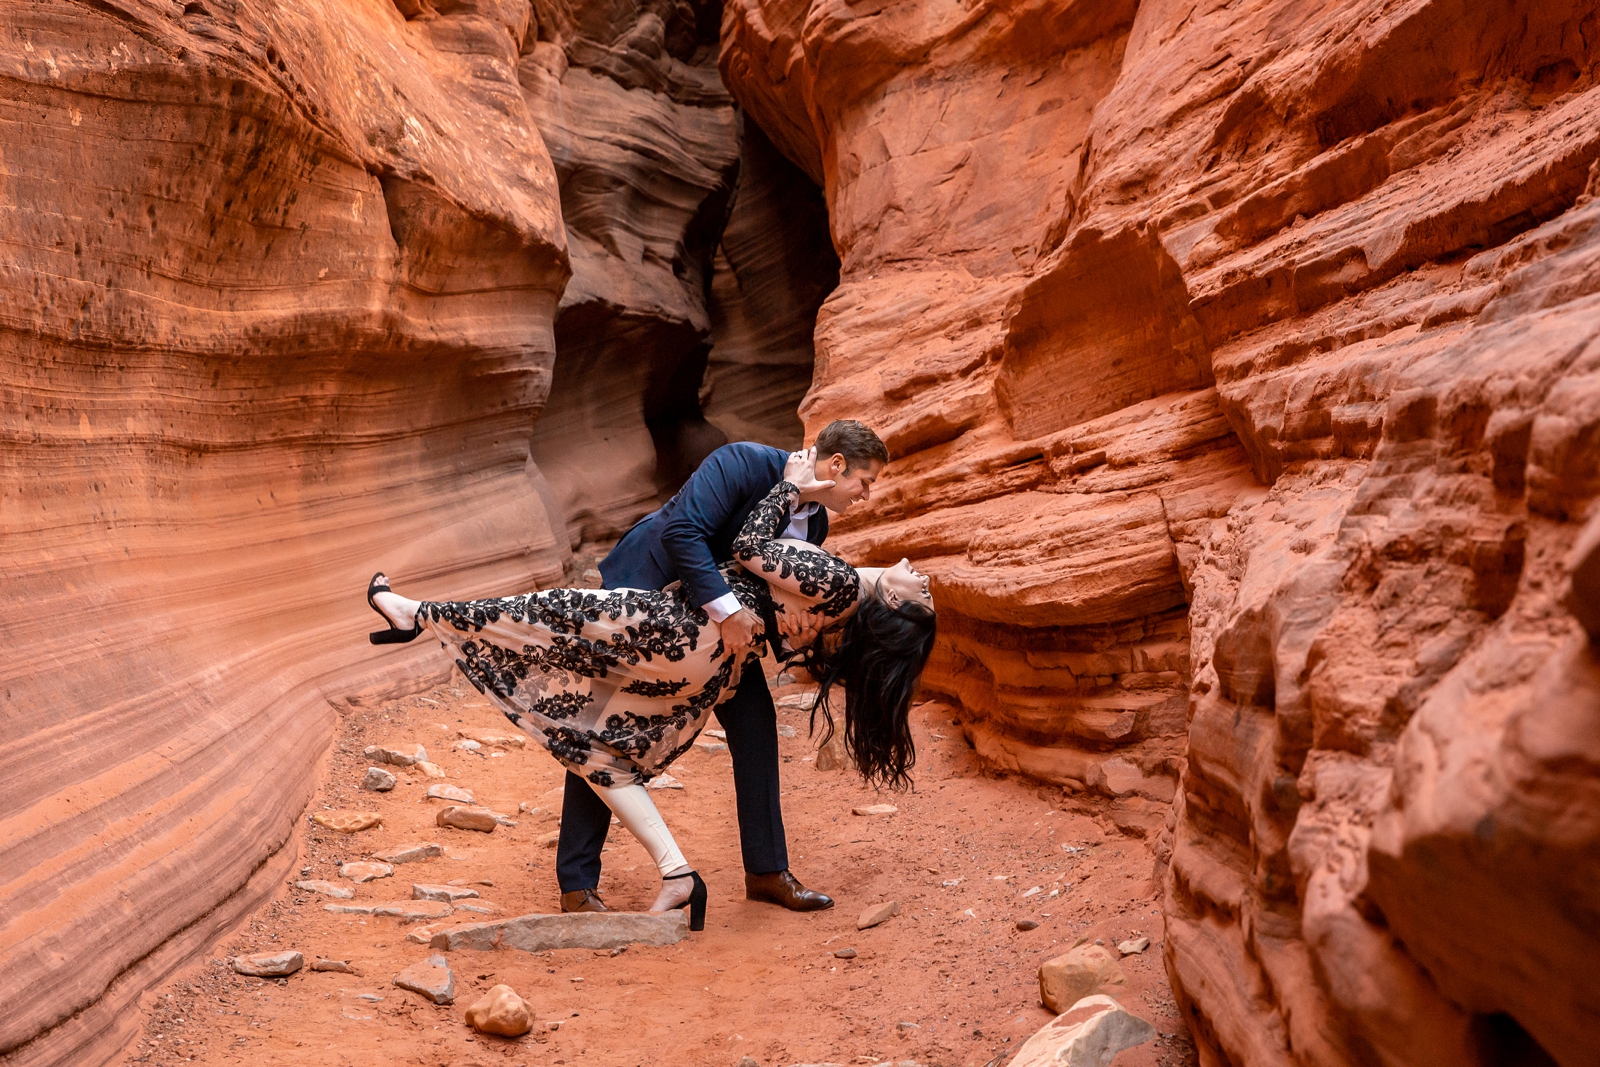 Super fun engaged couple in a Utah slot canyon.